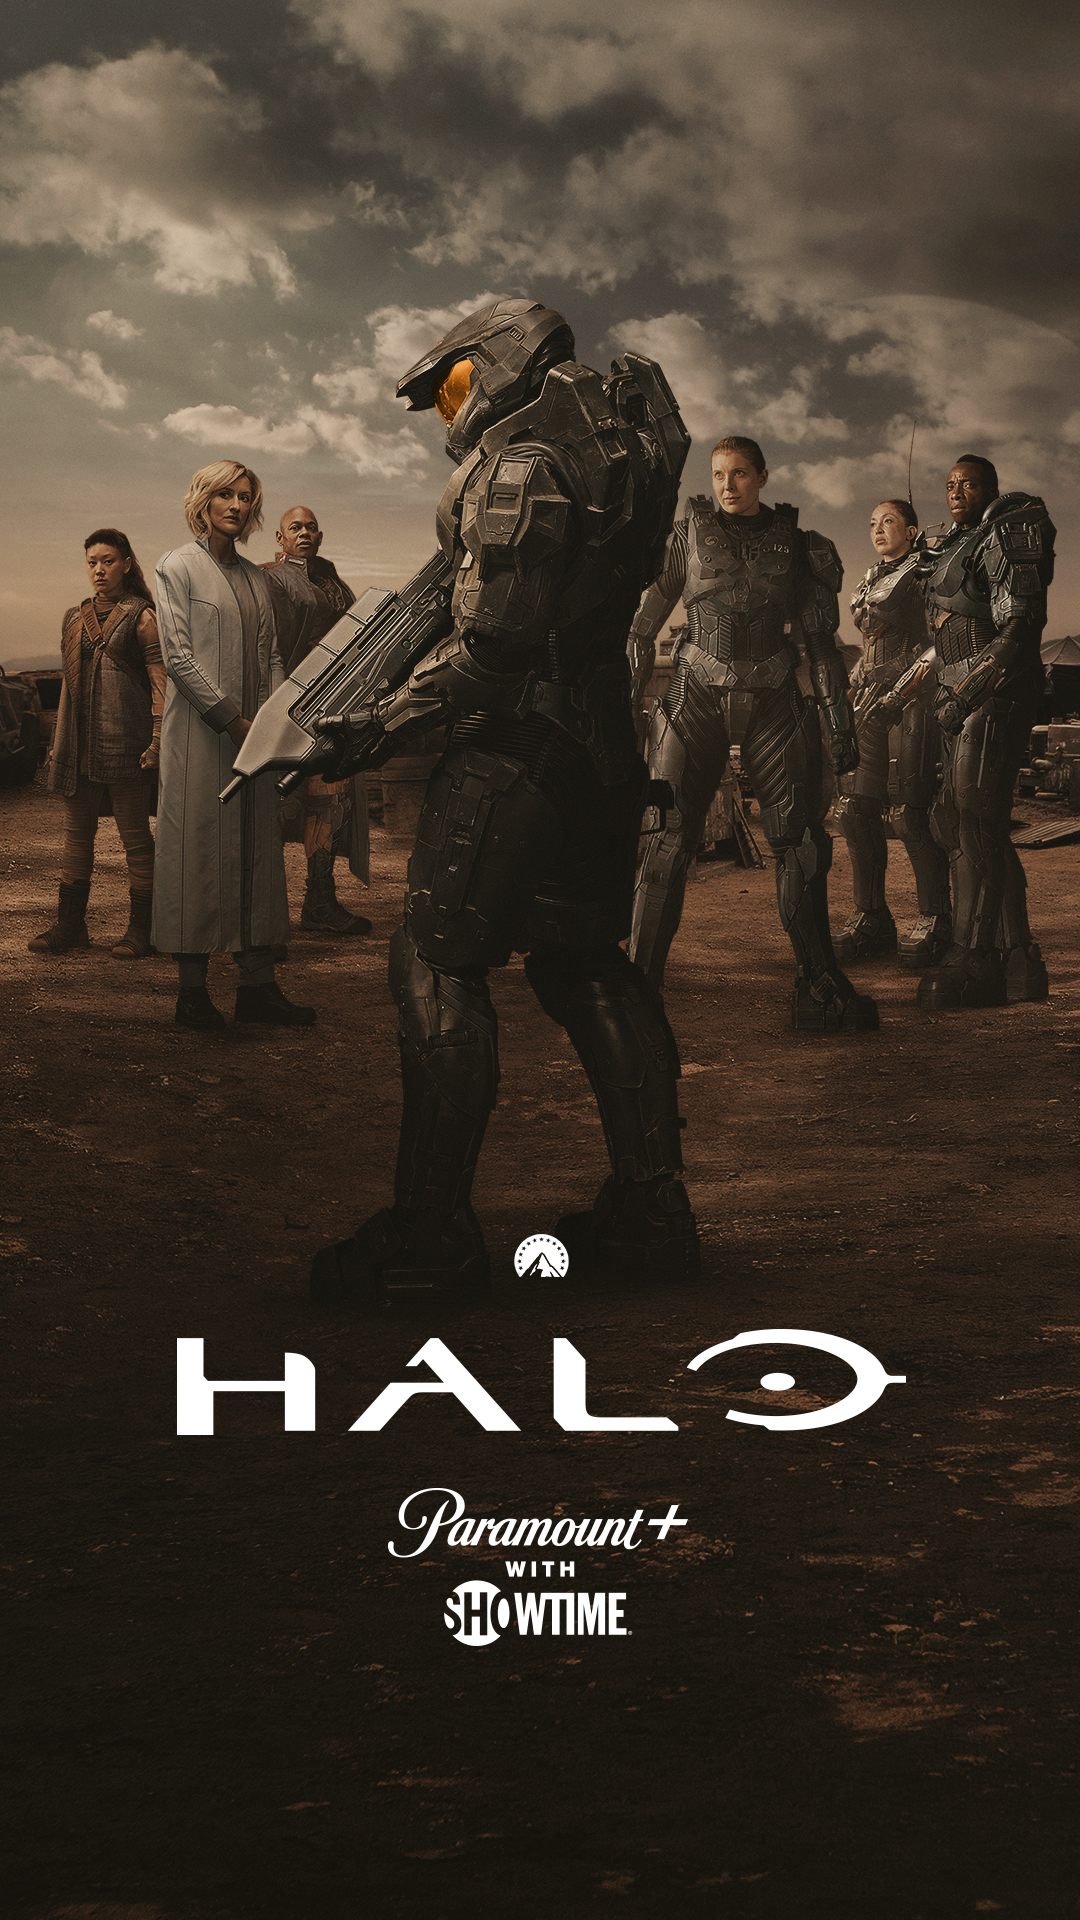 Halo on Paramount+ with Showtime